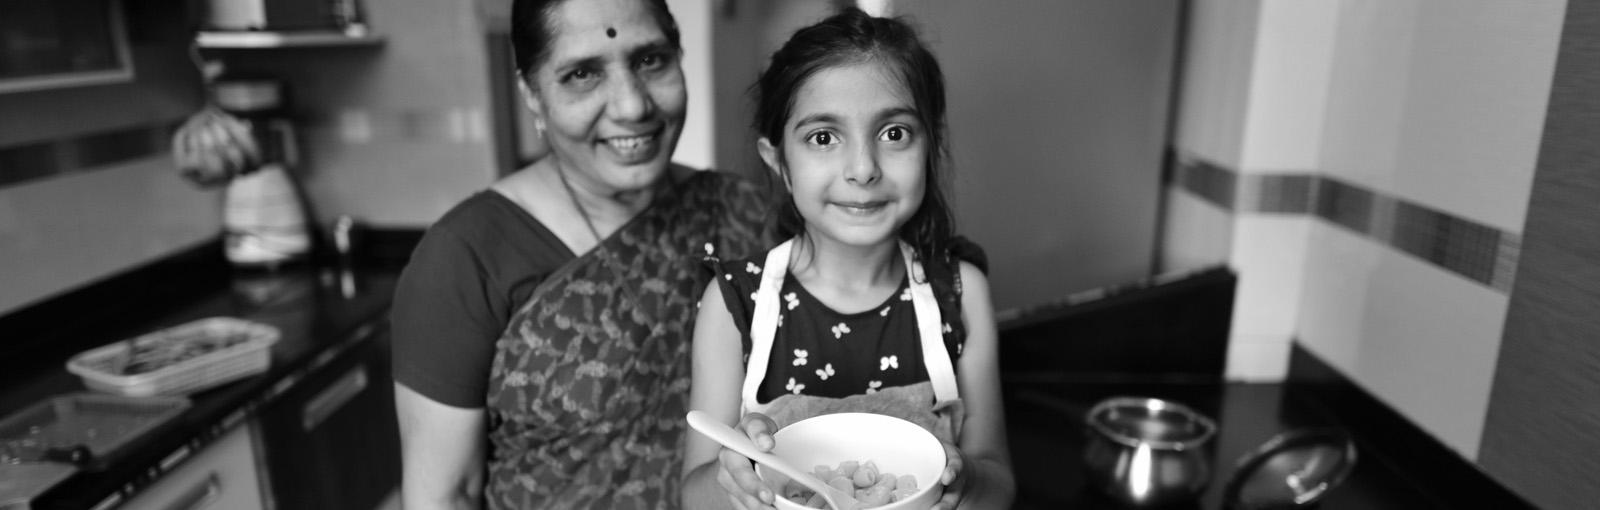 Mother and daughter with food in a bowl